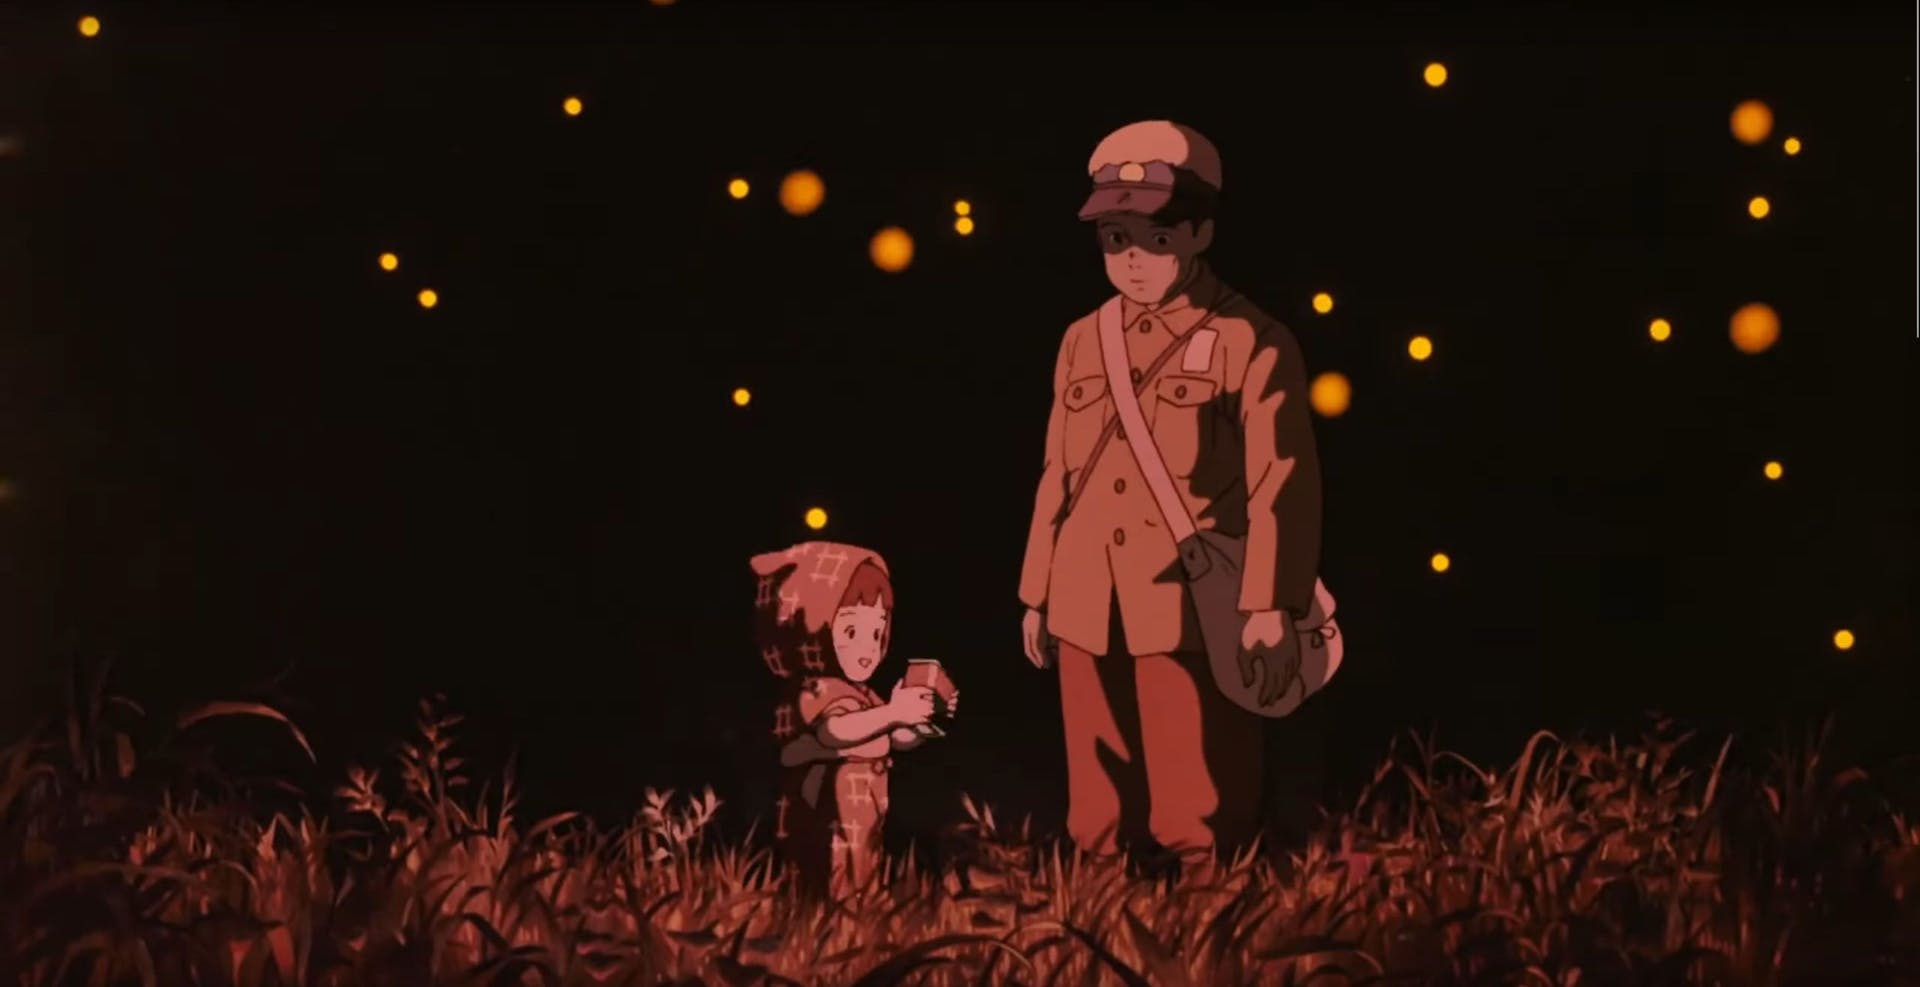 A scene from the drama anime, "Grave of the Fireflies".